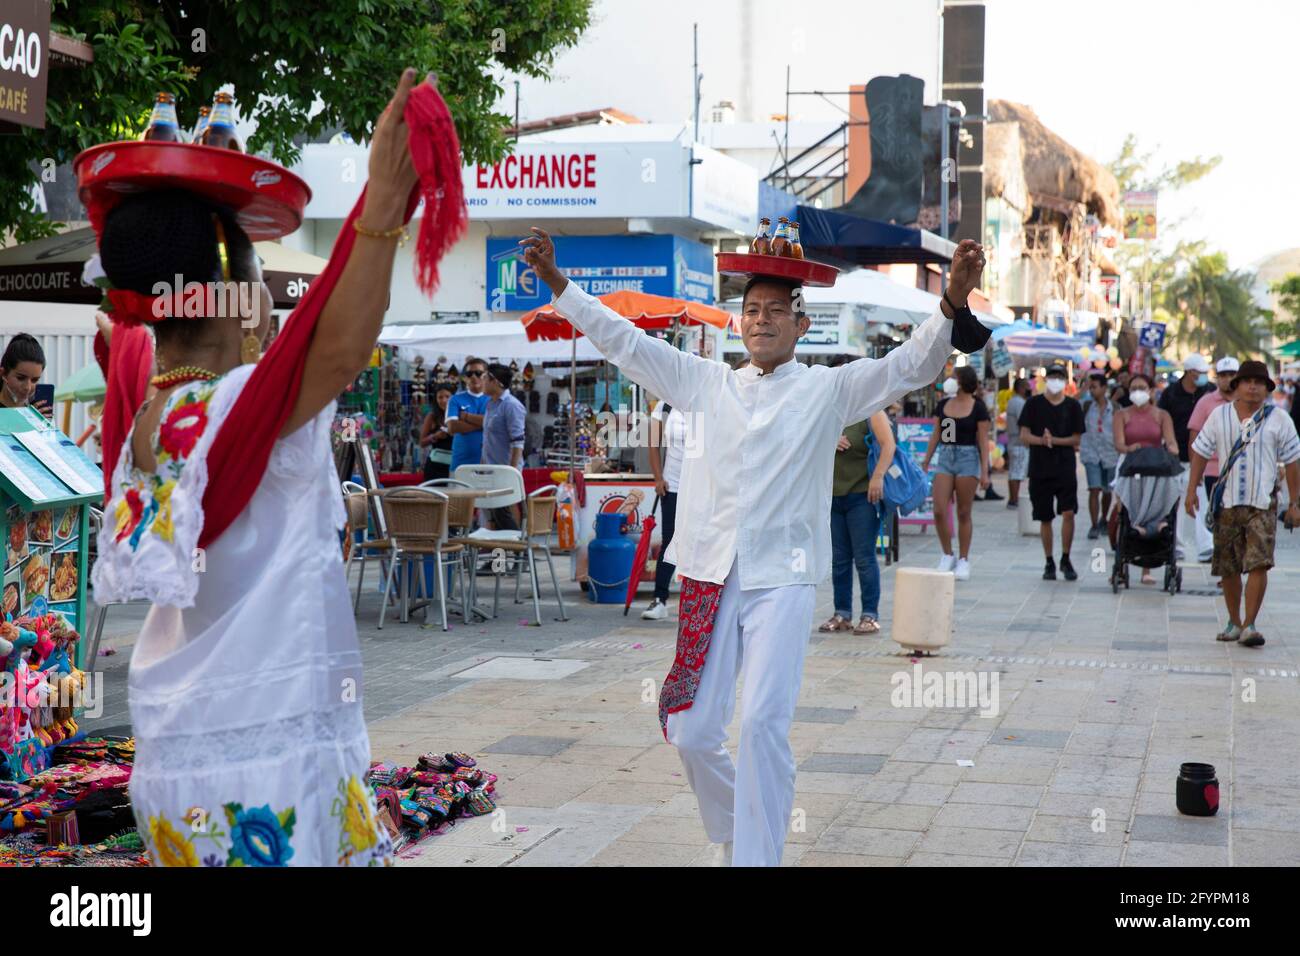 Bernardo Coca (R) and a dancer perform on the 5th Avenue amid the coronavirus pandemic in Playa del Carmen, Quintana Roo state, Mexico, on April 30, 2021. Bernardo and his colleagues lost their jobs in the entertainment industry during the coronavirus outbreak in March 2020. As they remain unemployed, they are forced to perform on the streets to make a living. Mexico is one of the countries hardest hit by the pandemic. The state of Quintana Roo has confirmed nearly 26,000 positive cases. Limited testing means actual numbers are likely far higher. And even as tourists flock the Riviera Maya, of Stock Photo